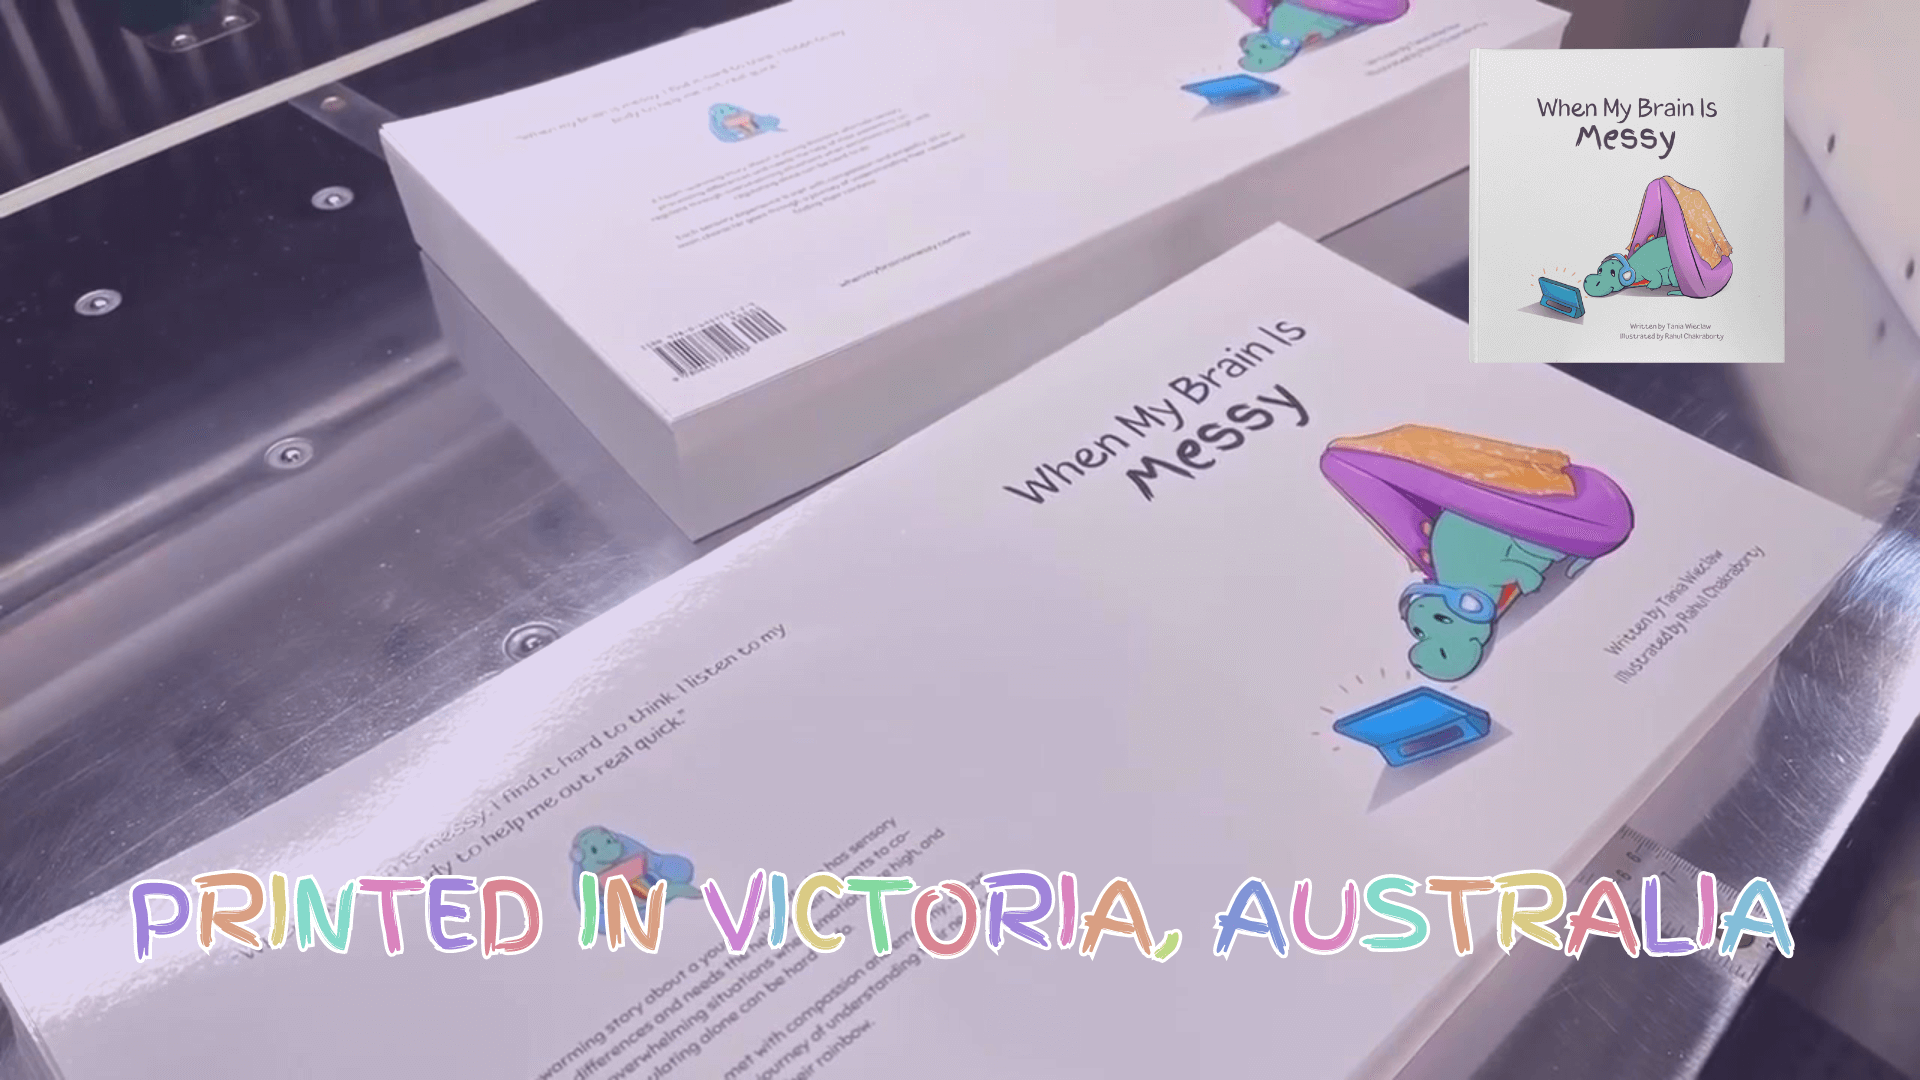 Load video: A short video of &#39;When My Brain Is Messy&#39; being printed in a printing facility located in Ballarat, Australia.